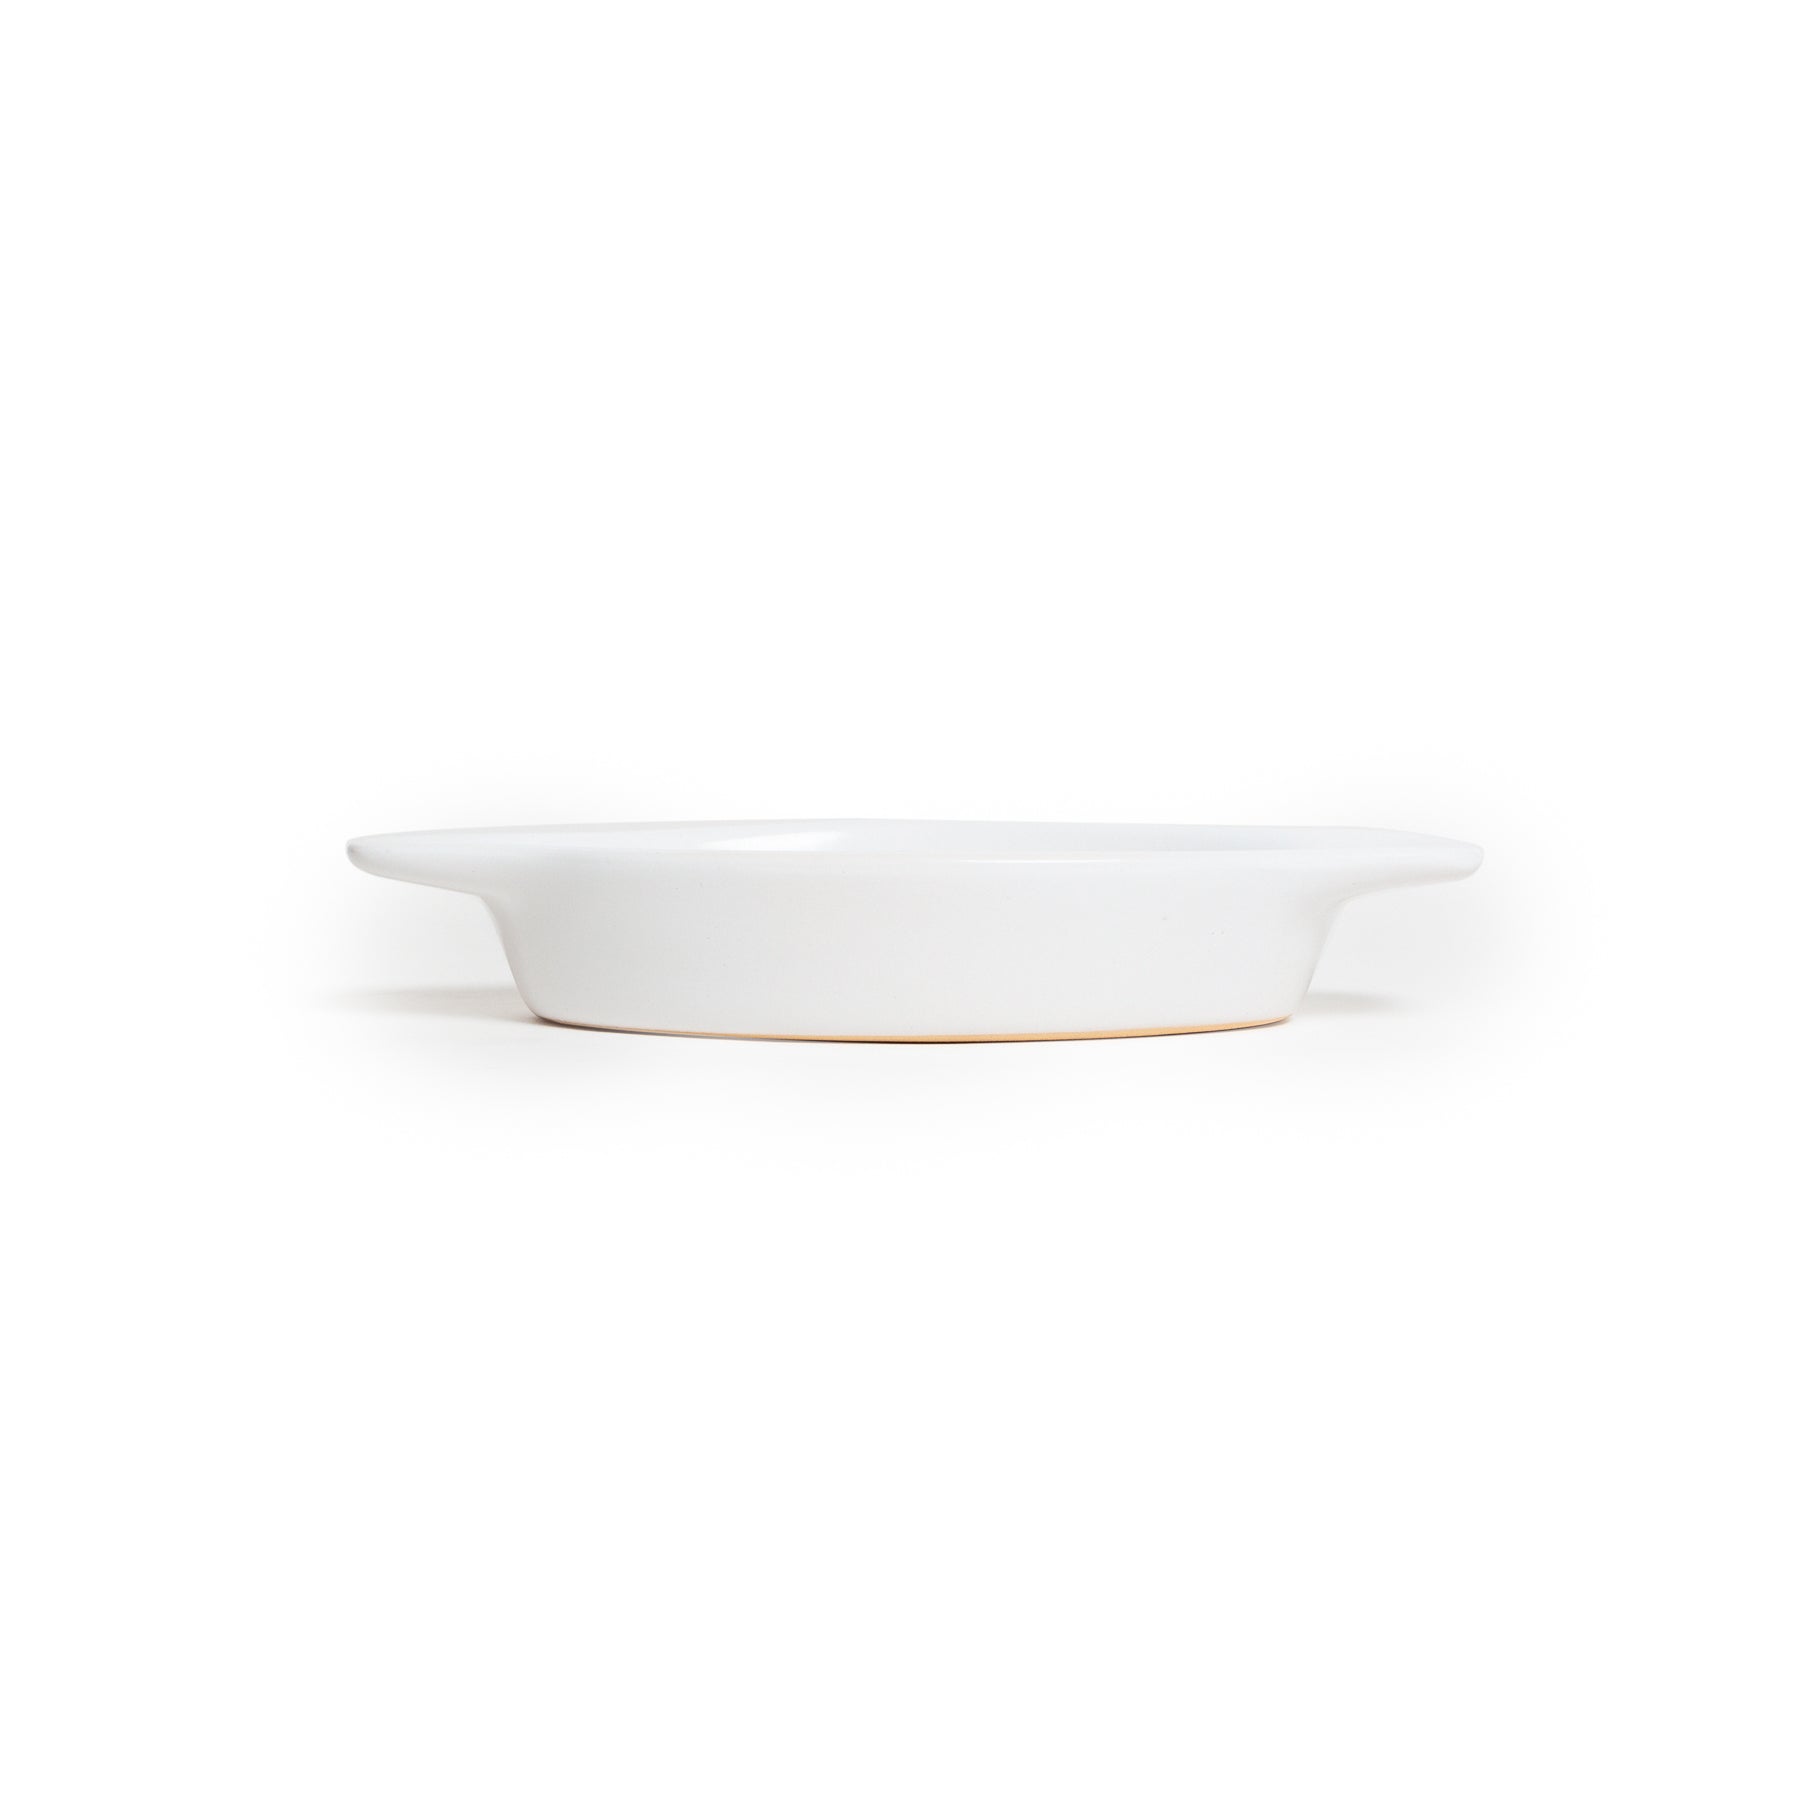 Poterie Renault Handled Oval Dish